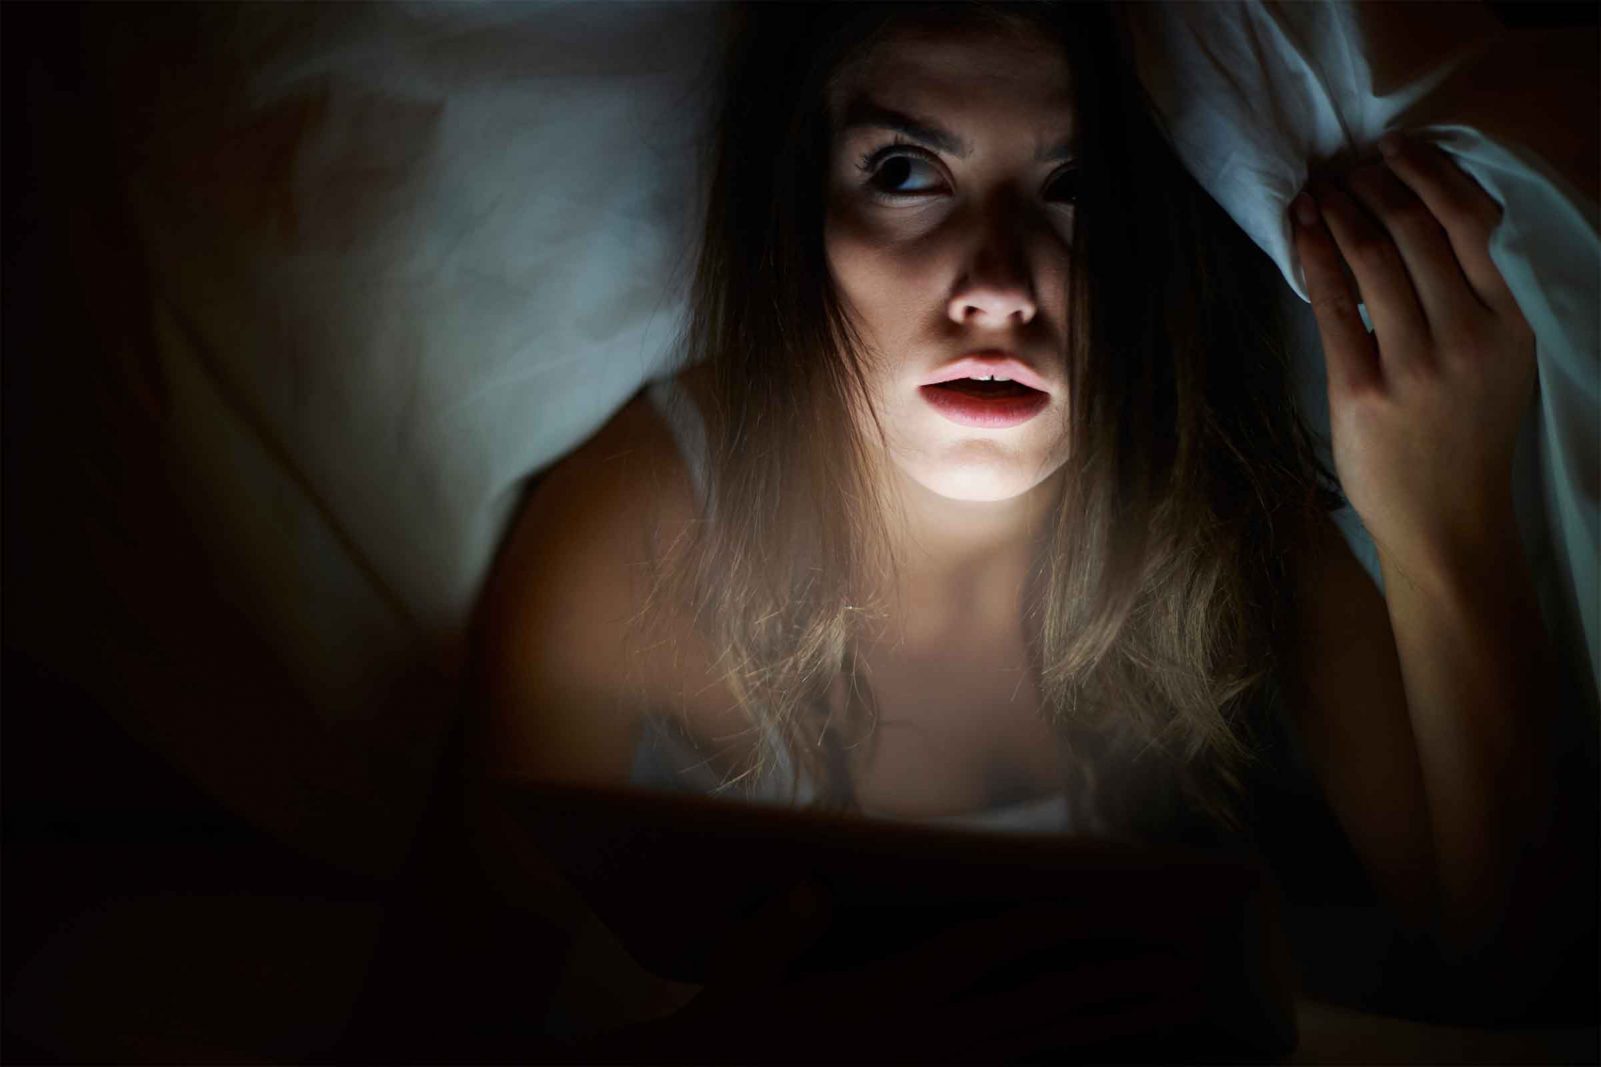 Here Are 20 General Knowledge Questions — How Many Can You Answer Correctly? scared person darkness